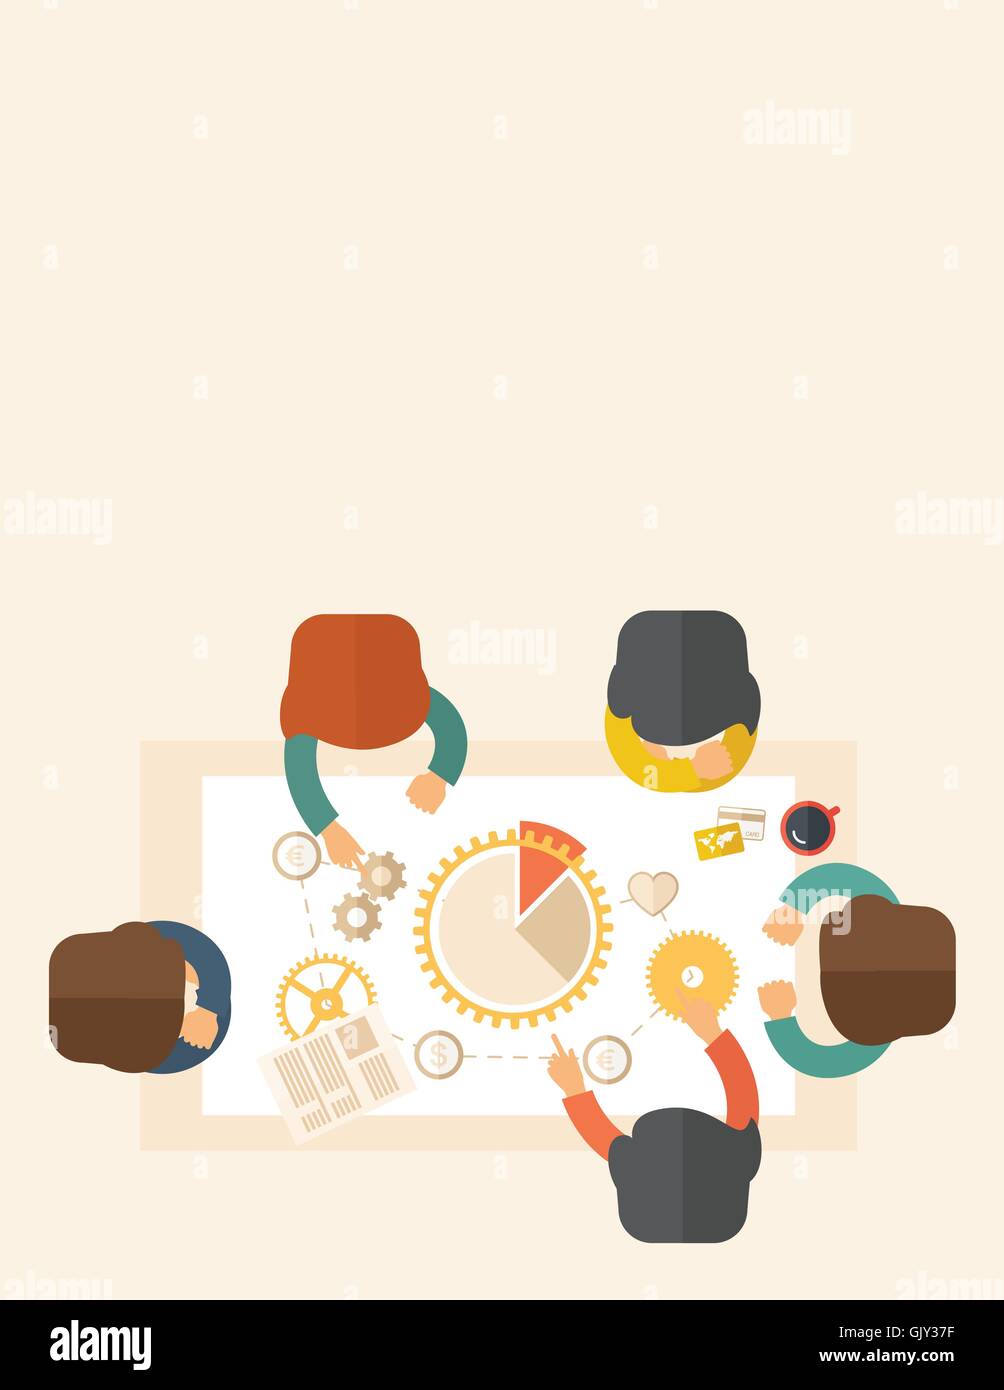 Group meeting Stock Vector